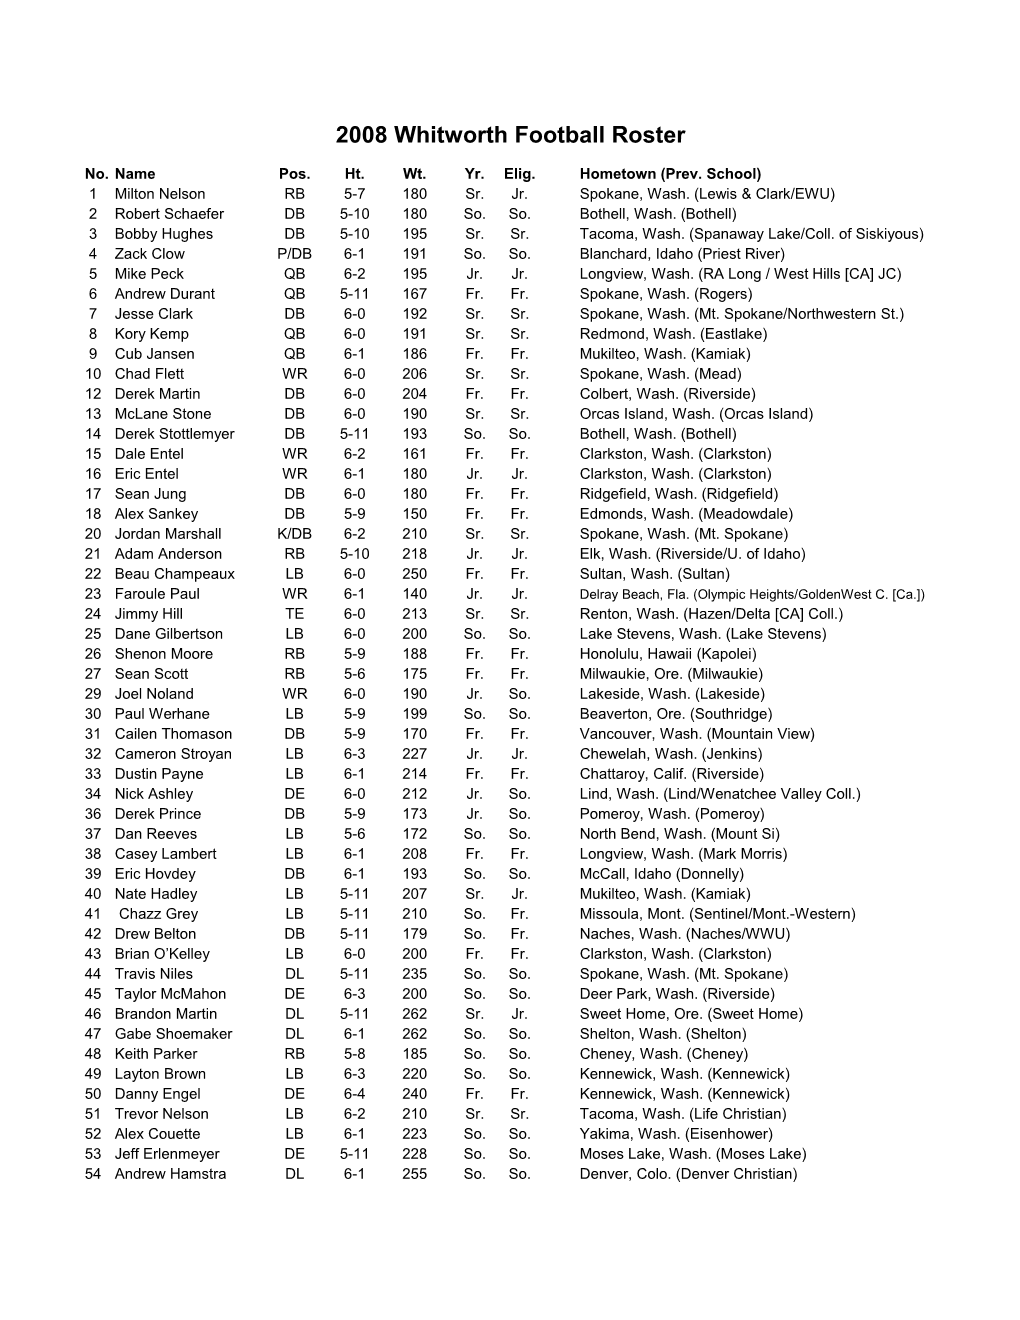 2001 Whitworth Football Roster